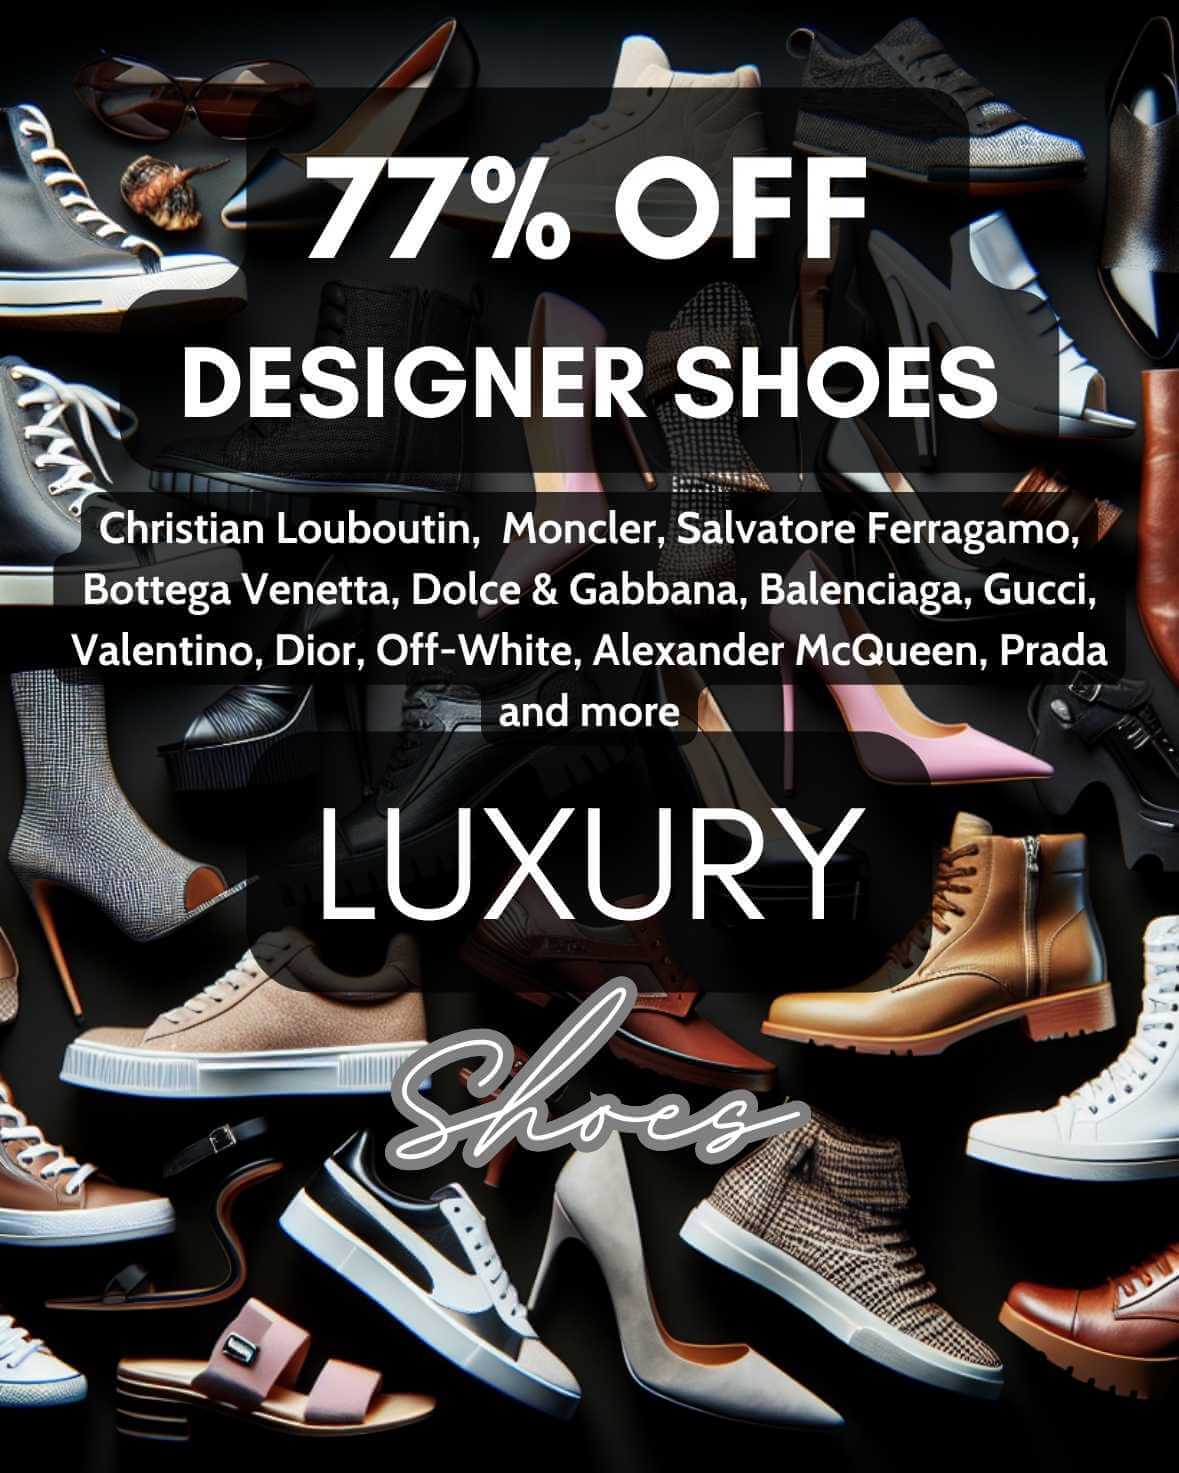 Authentic Luxury Designer Brands at Clearance Prices + Free 🌎Shipping ...